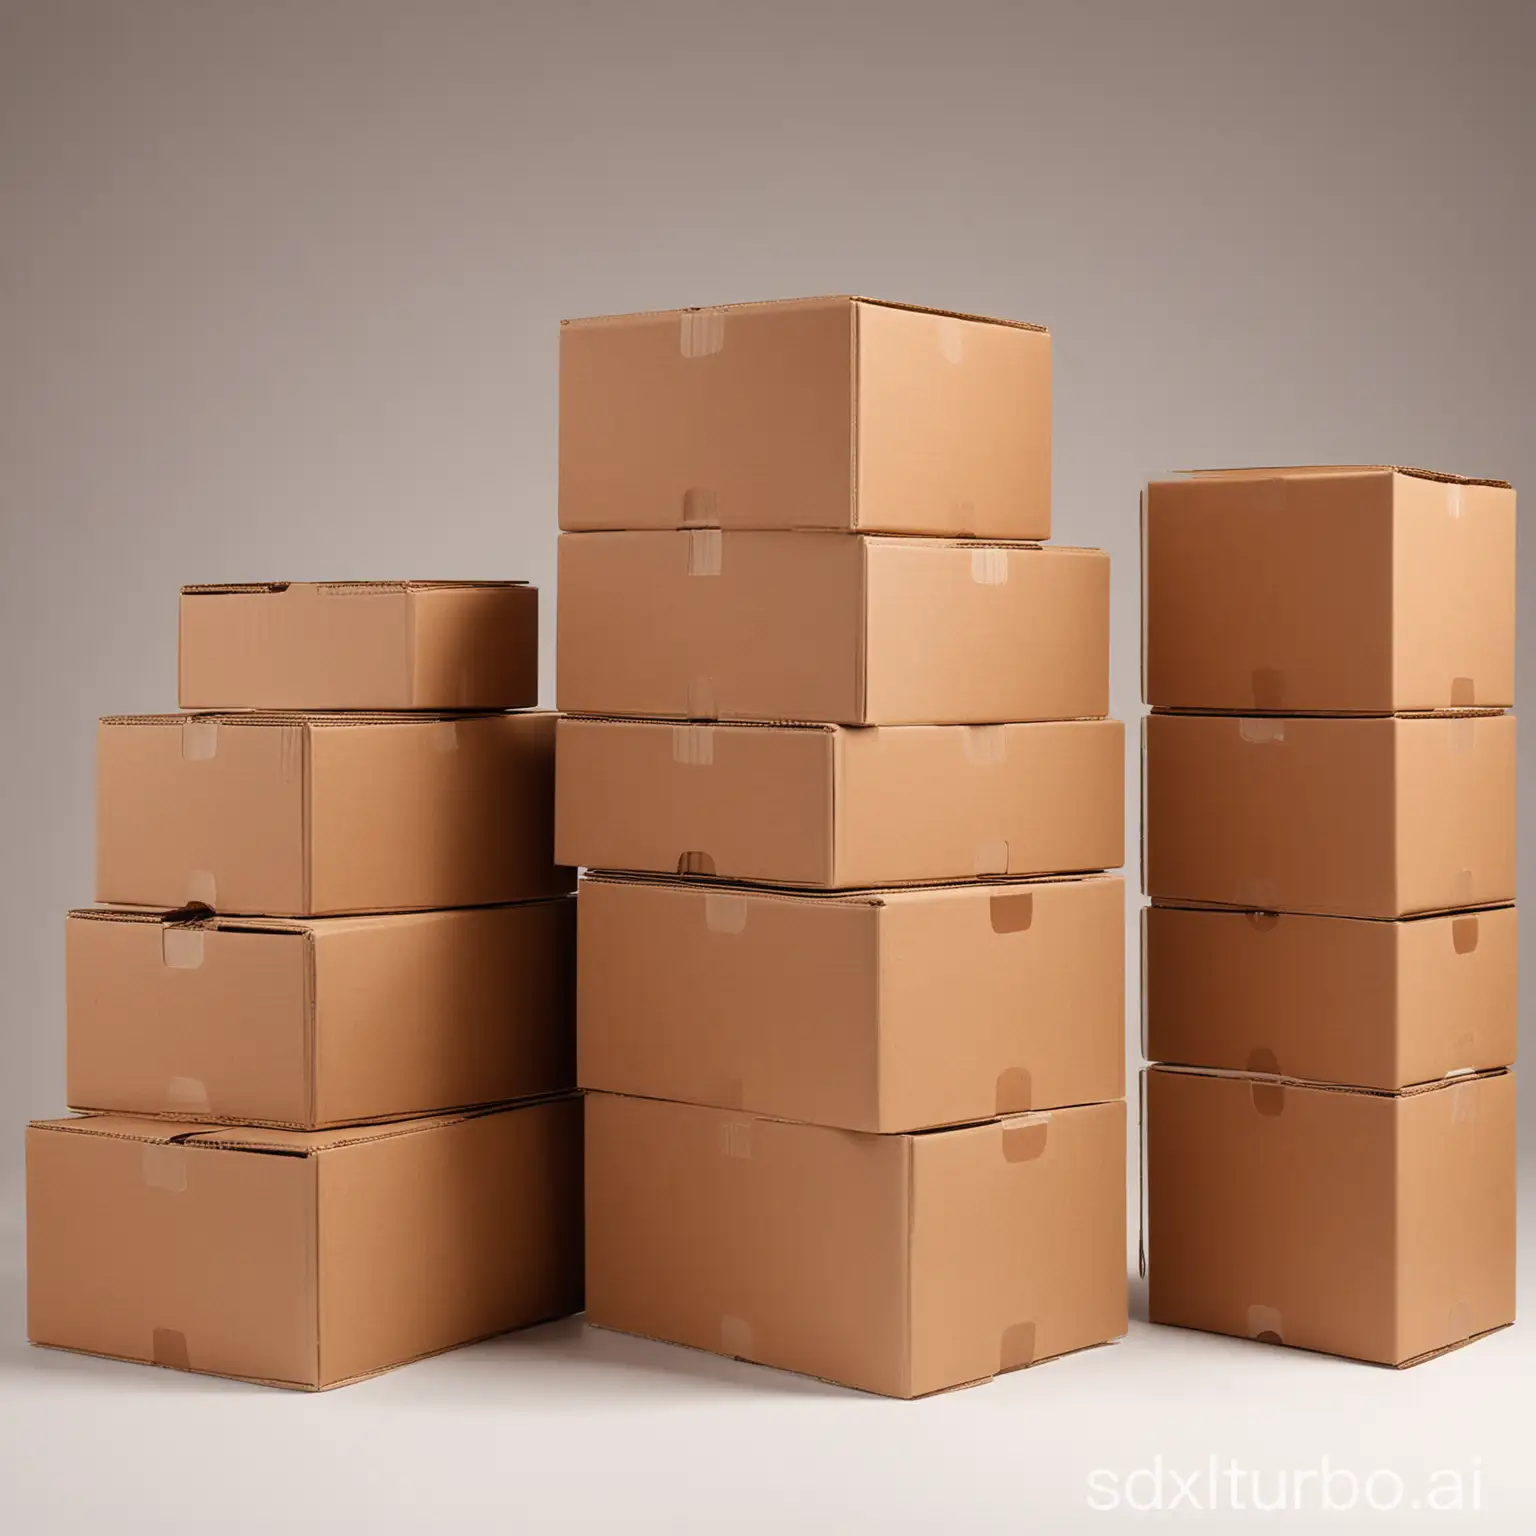 A stack of brown corrugated cardboard boxes of different sizes. The boxes are stacked neatly and securely, with the flaps closed and the edges aligned. The boxes are placed on a neutral background, such as a white or gray surface.